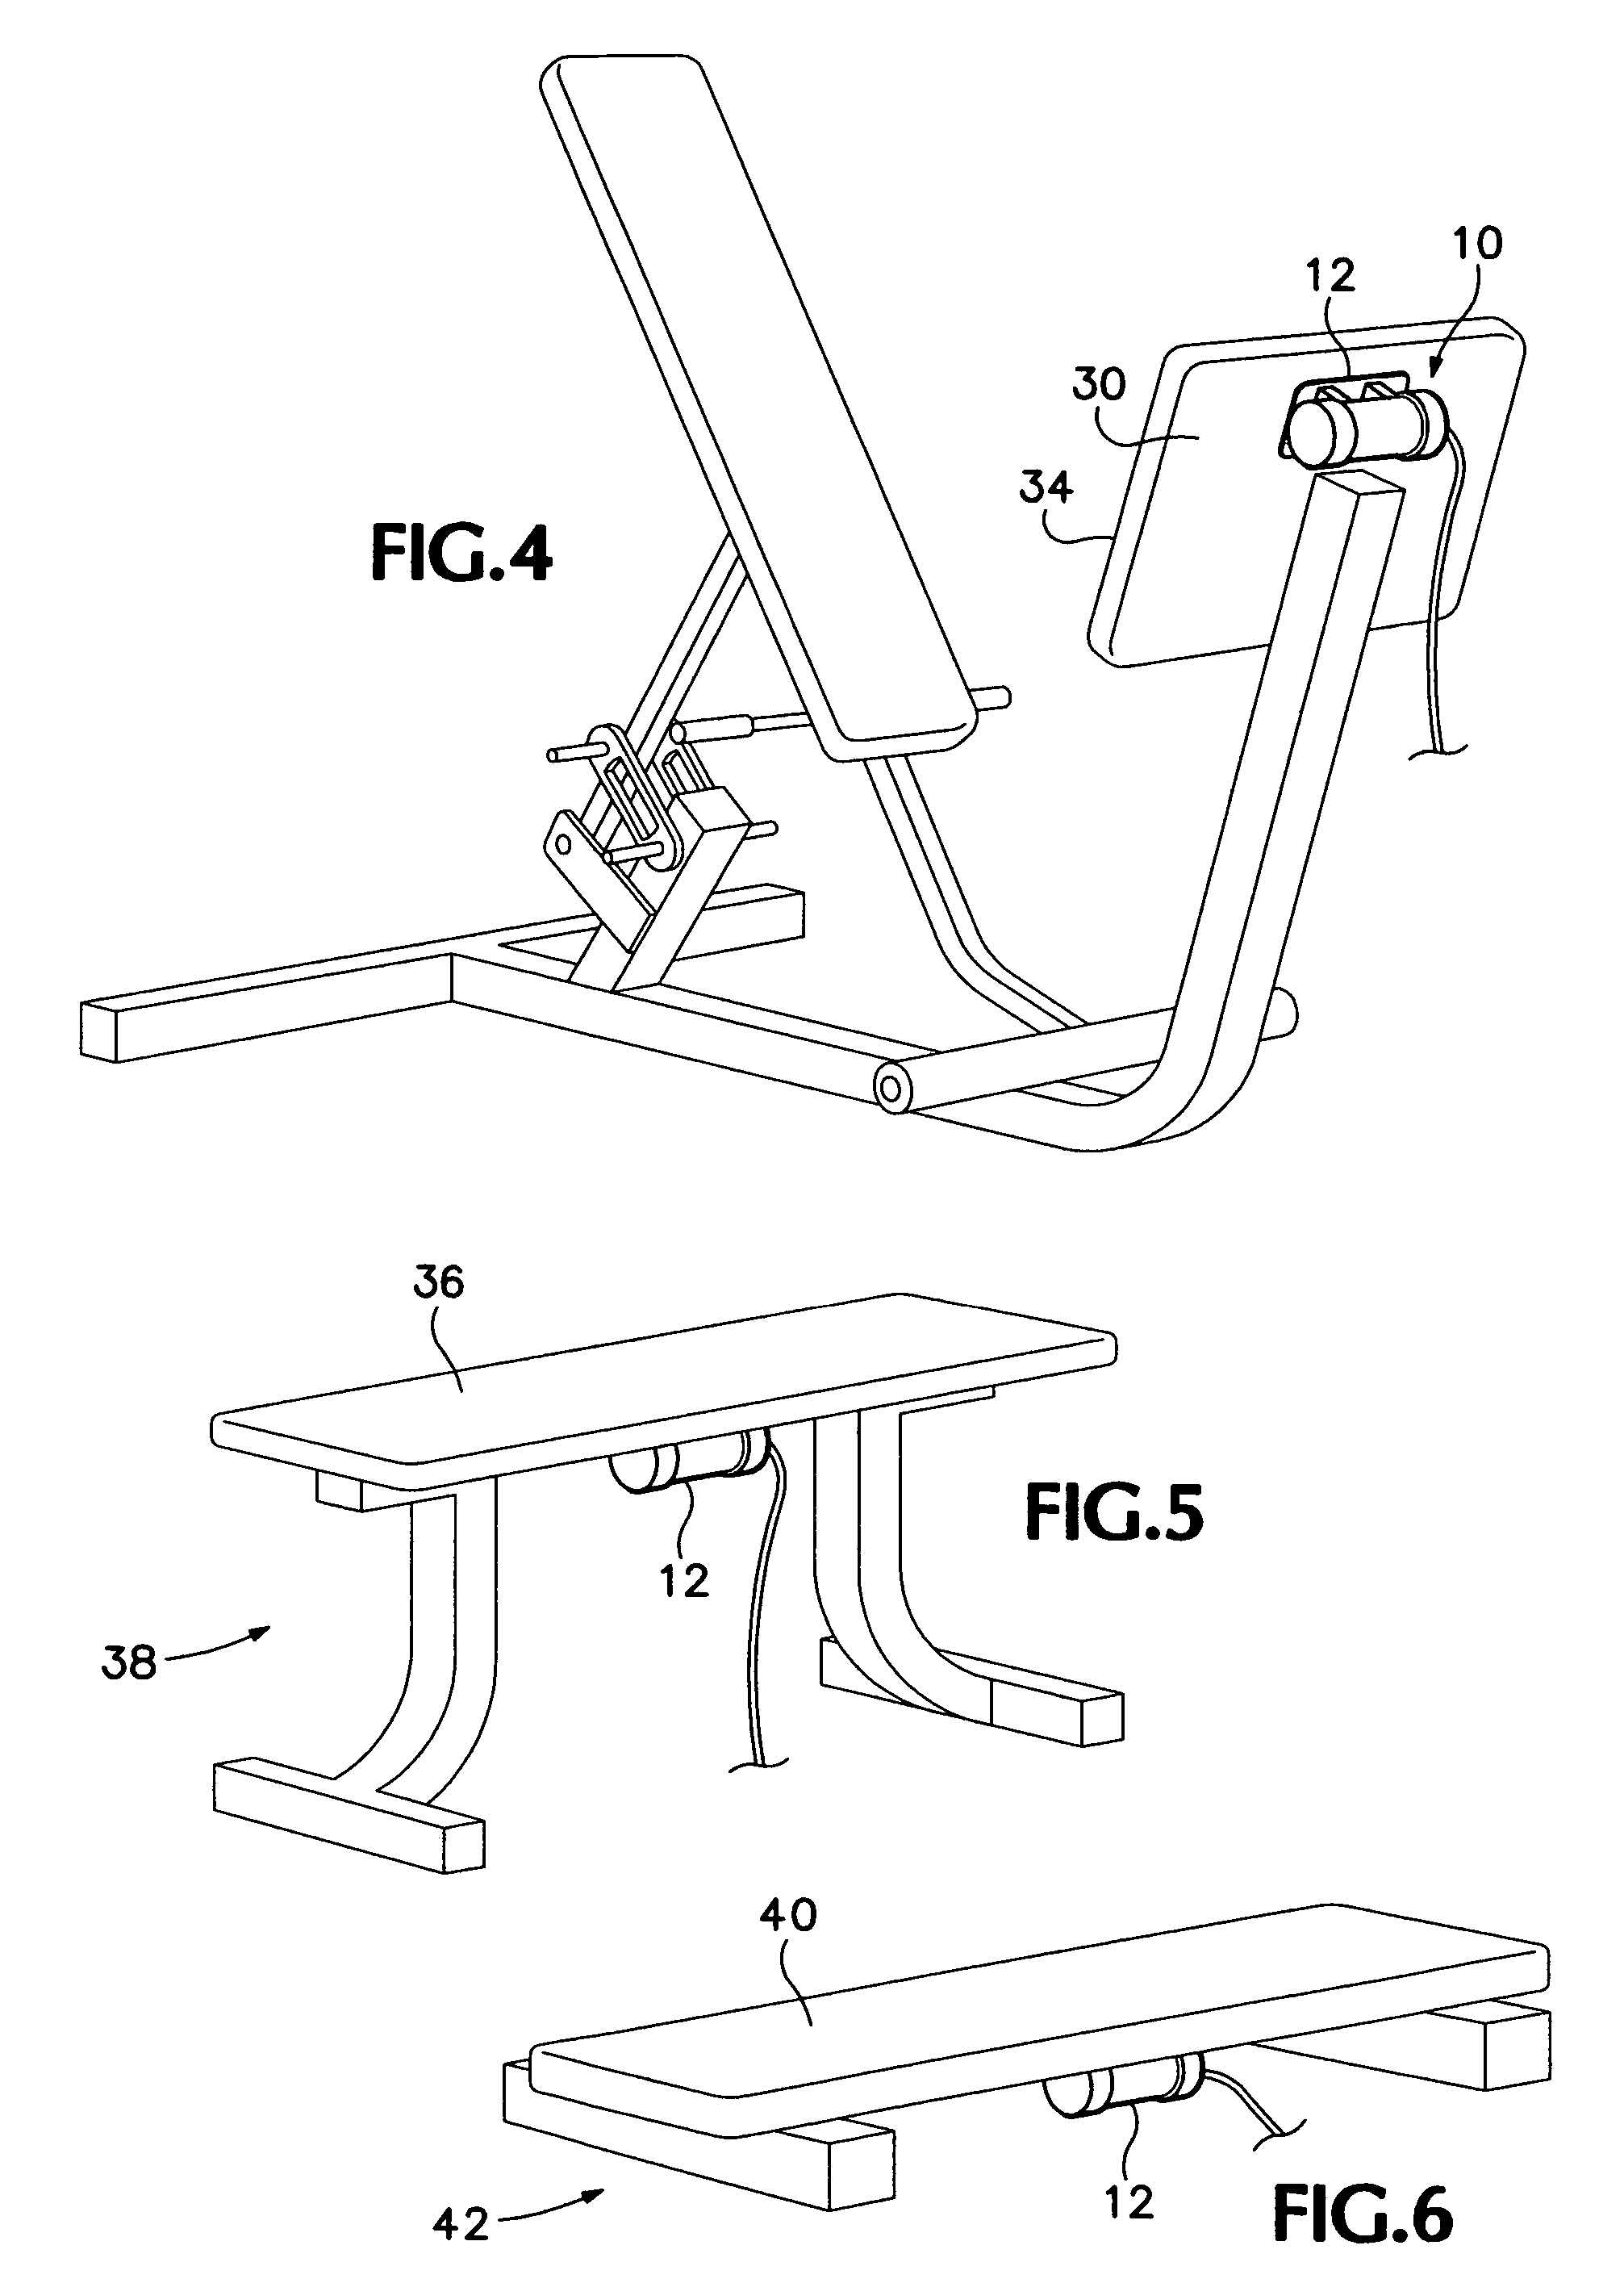 Method and apparatus for attaching a vibration unit to an exercise device